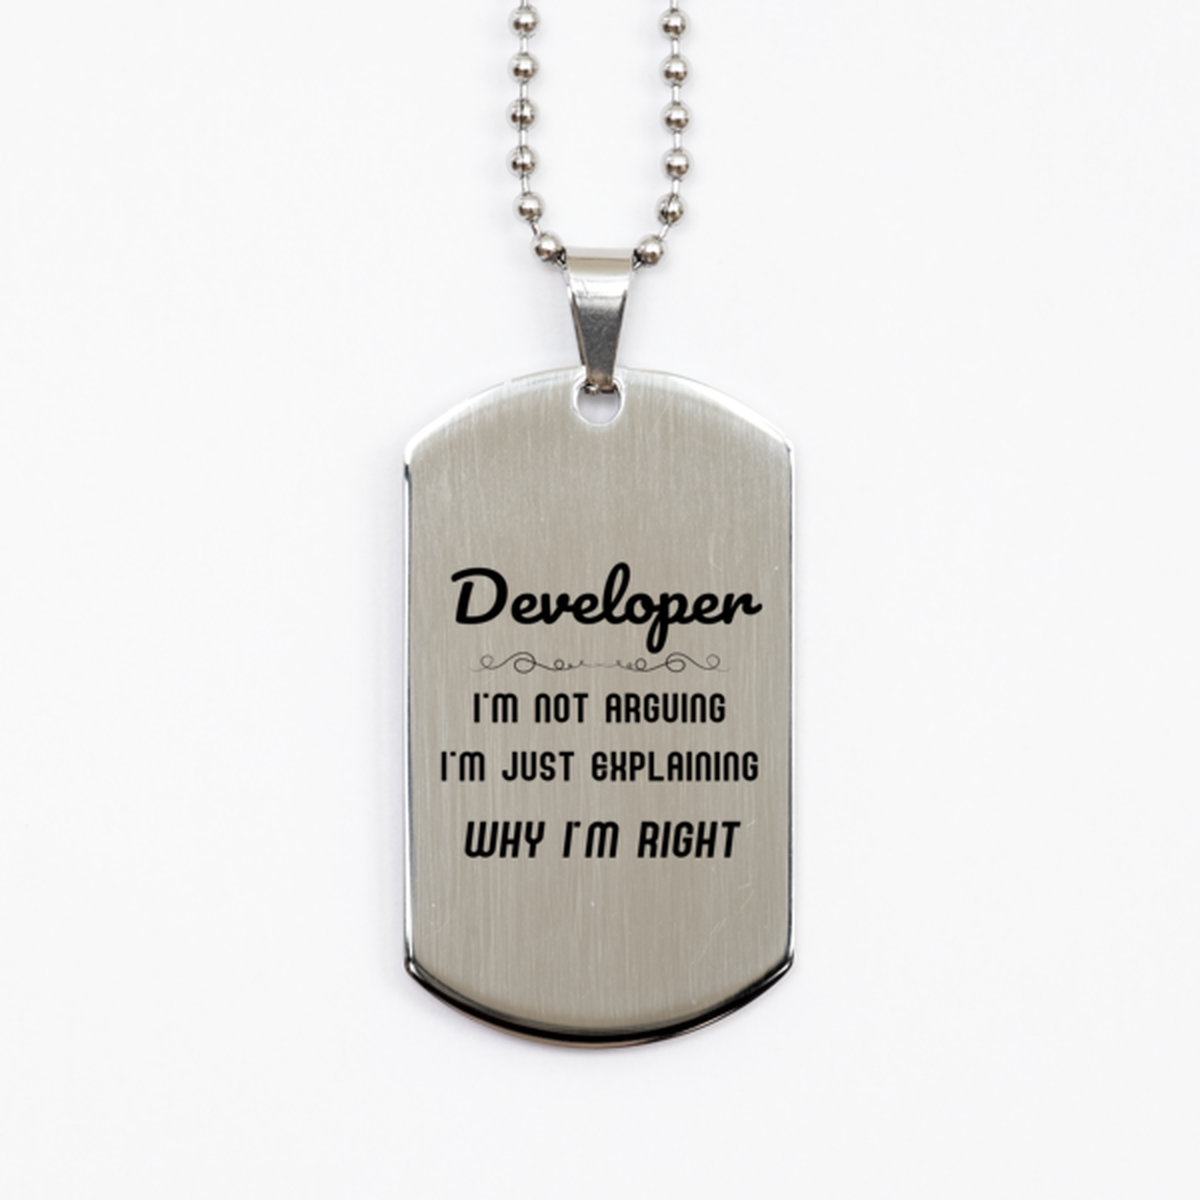 Developer I'm not Arguing. I'm Just Explaining Why I'm RIGHT Silver Dog Tag, Funny Saying Quote Developer Gifts For Developer Graduation Birthday Christmas Gifts for Men Women Coworker